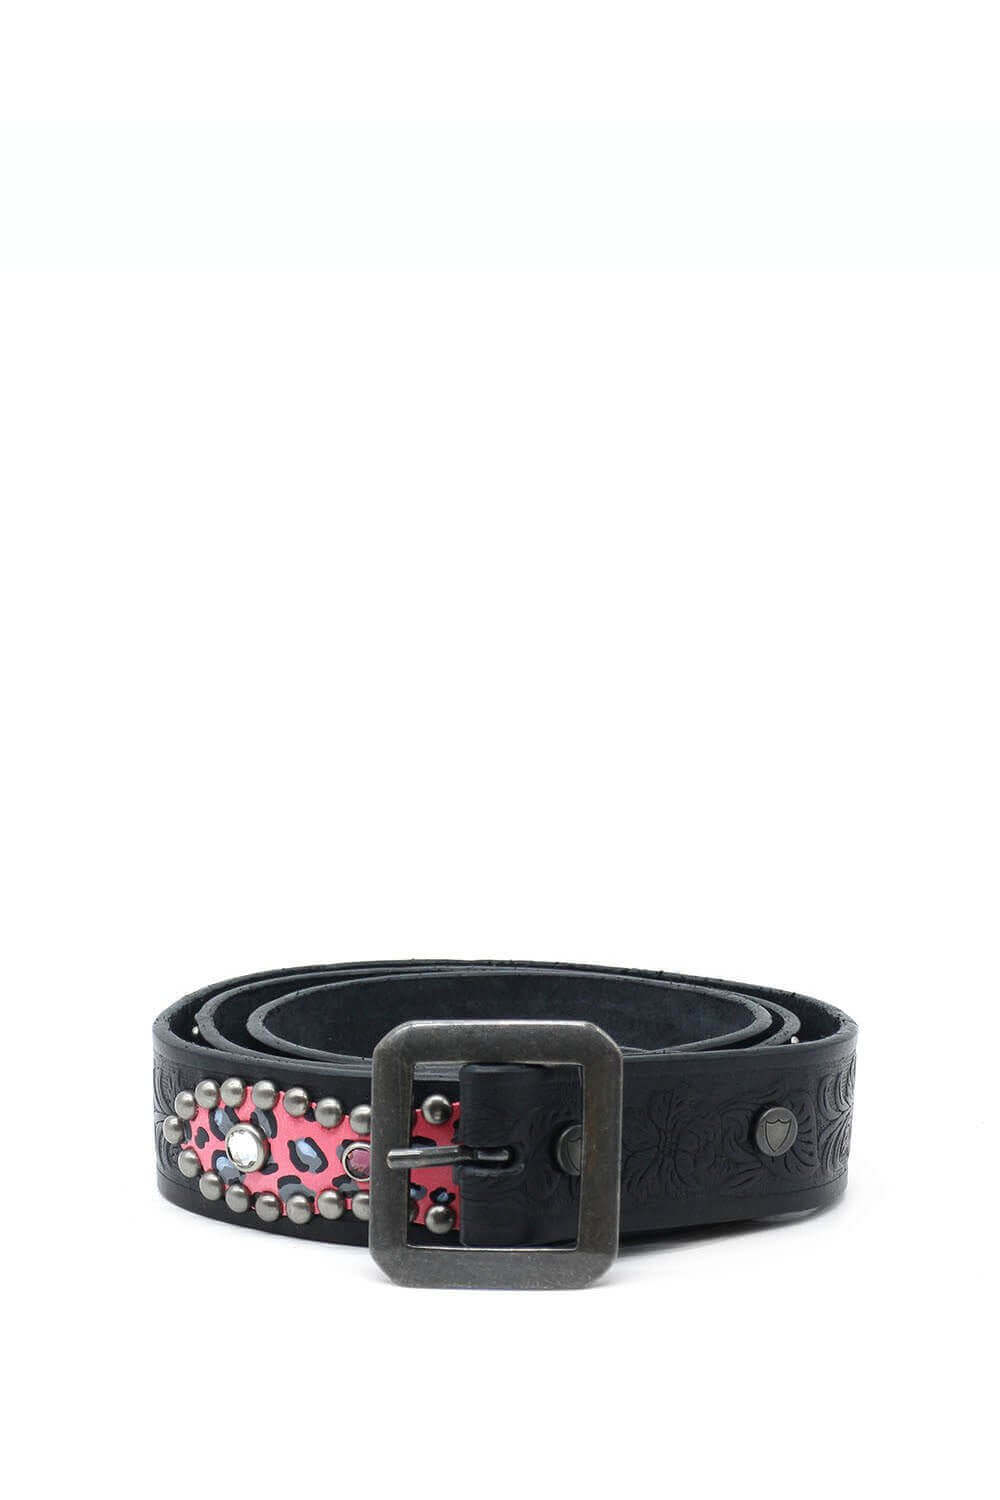 AMERICAN PAINTED BELT Black leather belt with studs and rhinestones.Height: 3 cm. Made in Italy. HTC LOS ANGELES